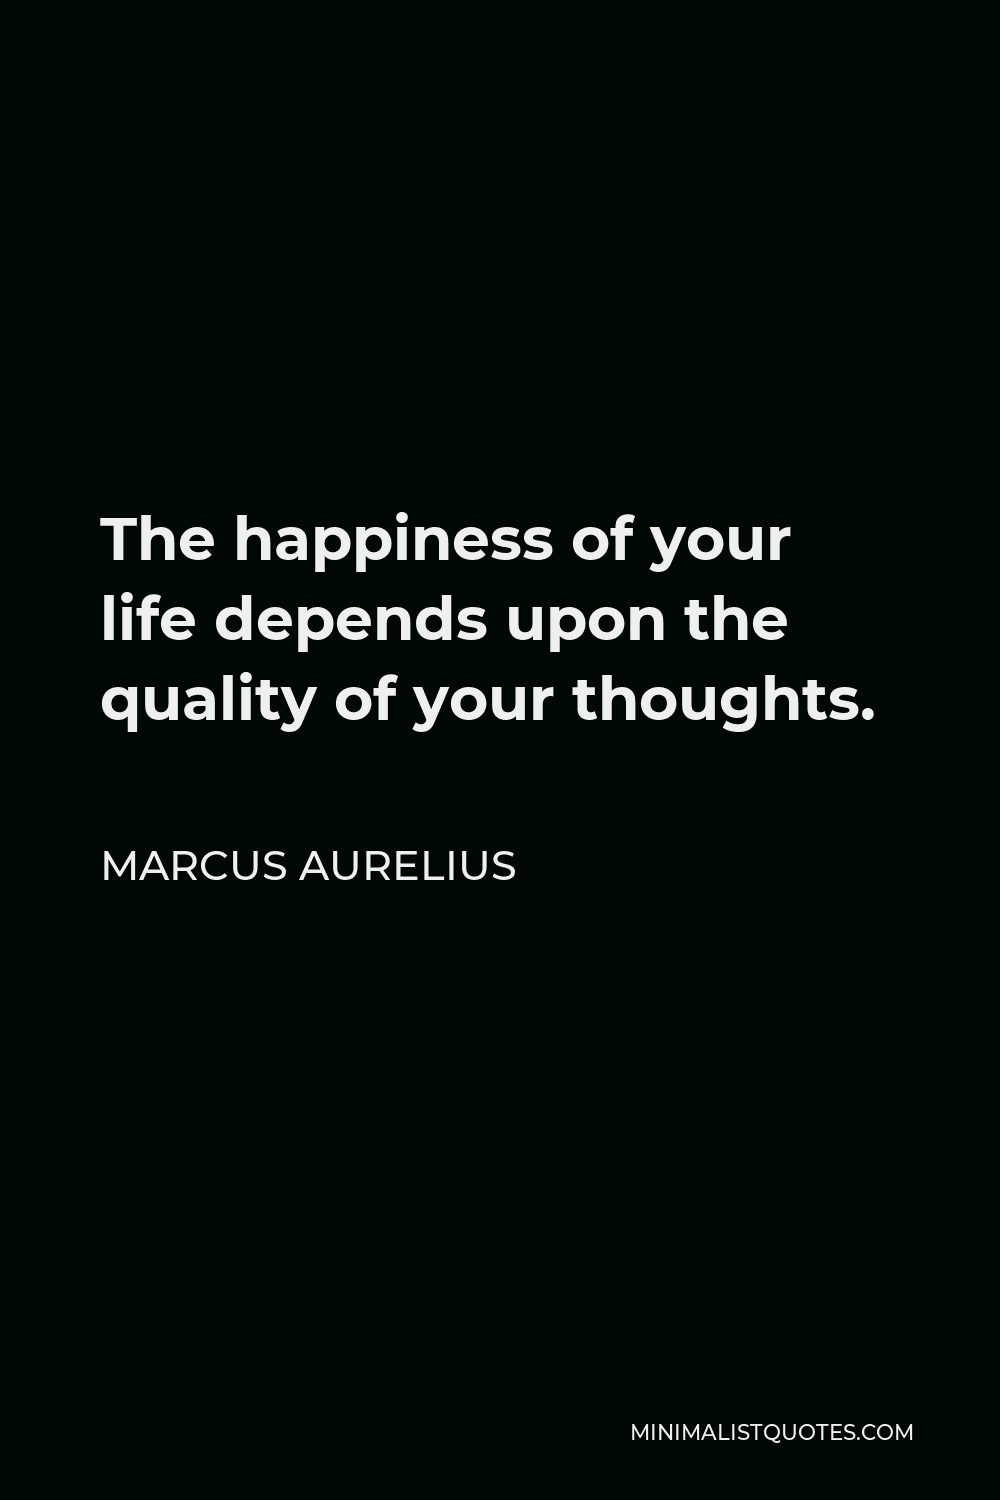 Marcus Aurelius Quote - The happiness of your life depends upon the quality of your thoughts.